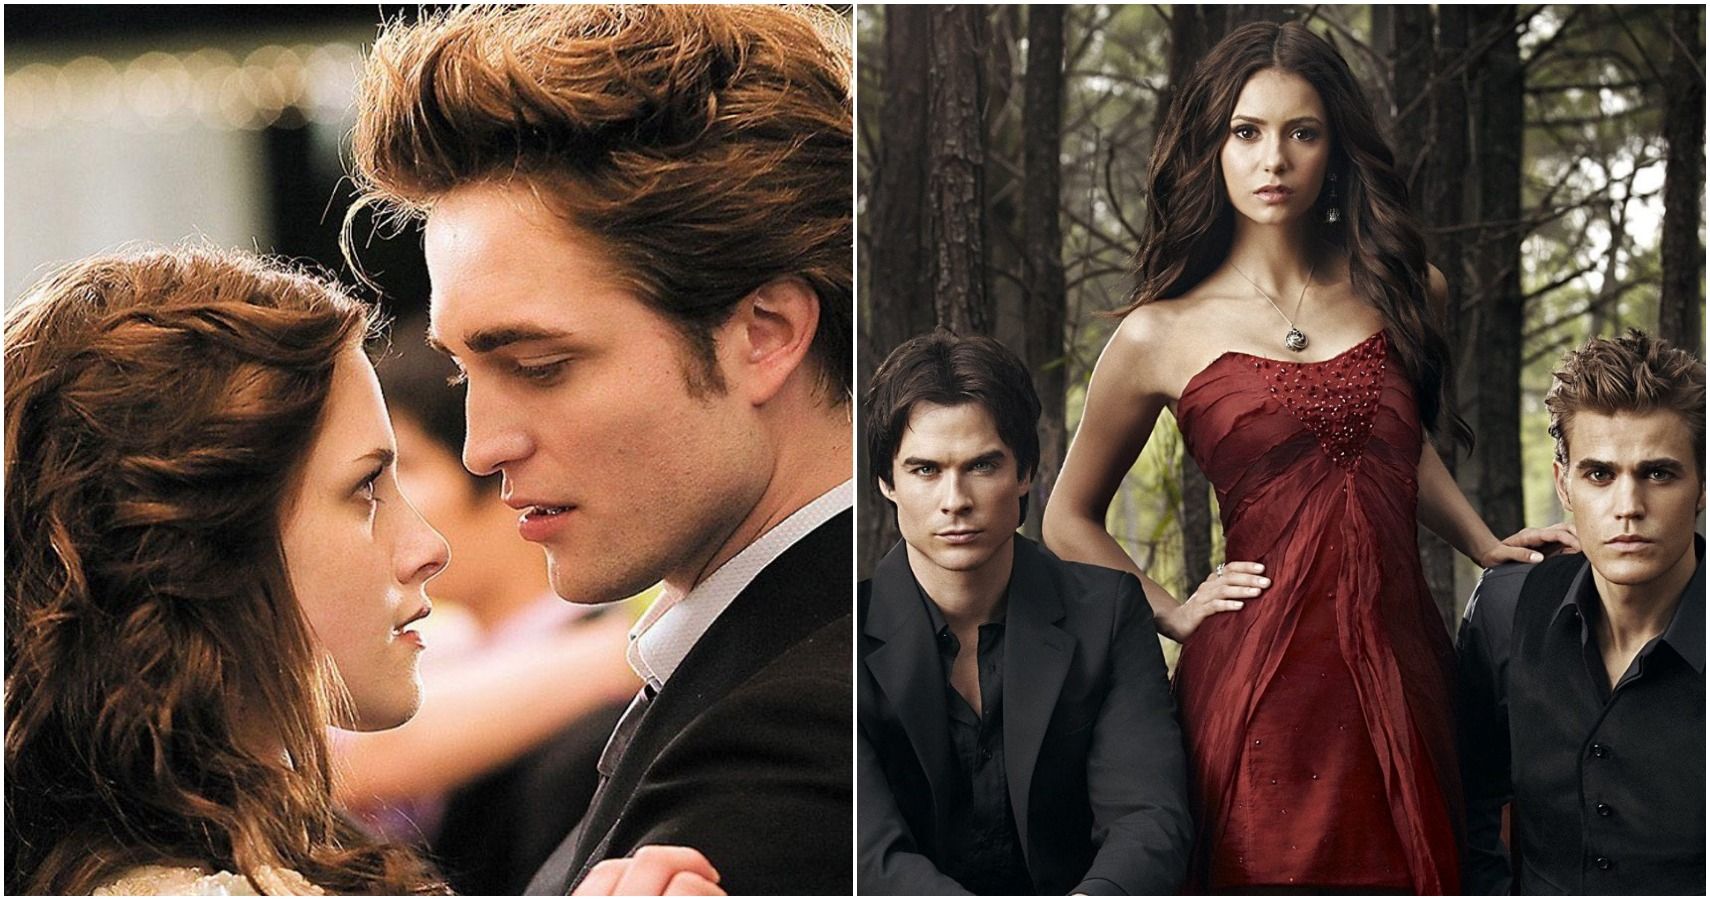 5 Reasons Twilight Is Better Than The Vampire Diaries (& 5 Ways It's Not)